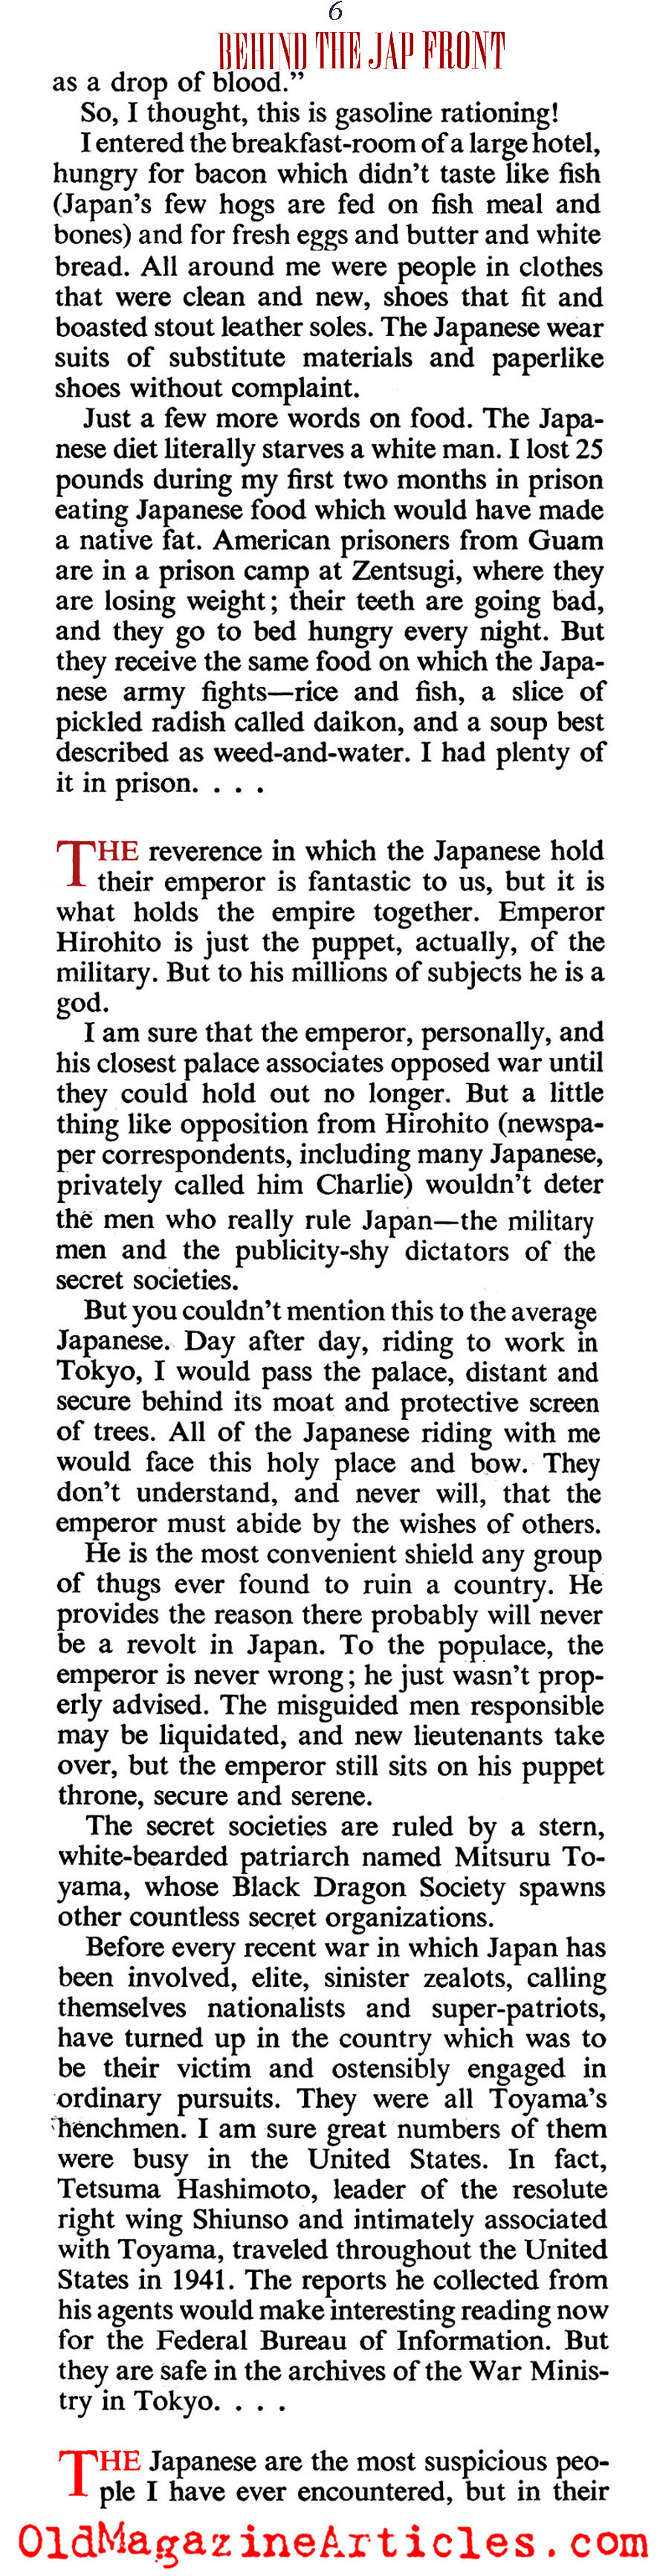 The Japanese Home Front (American Magazine, 1943)